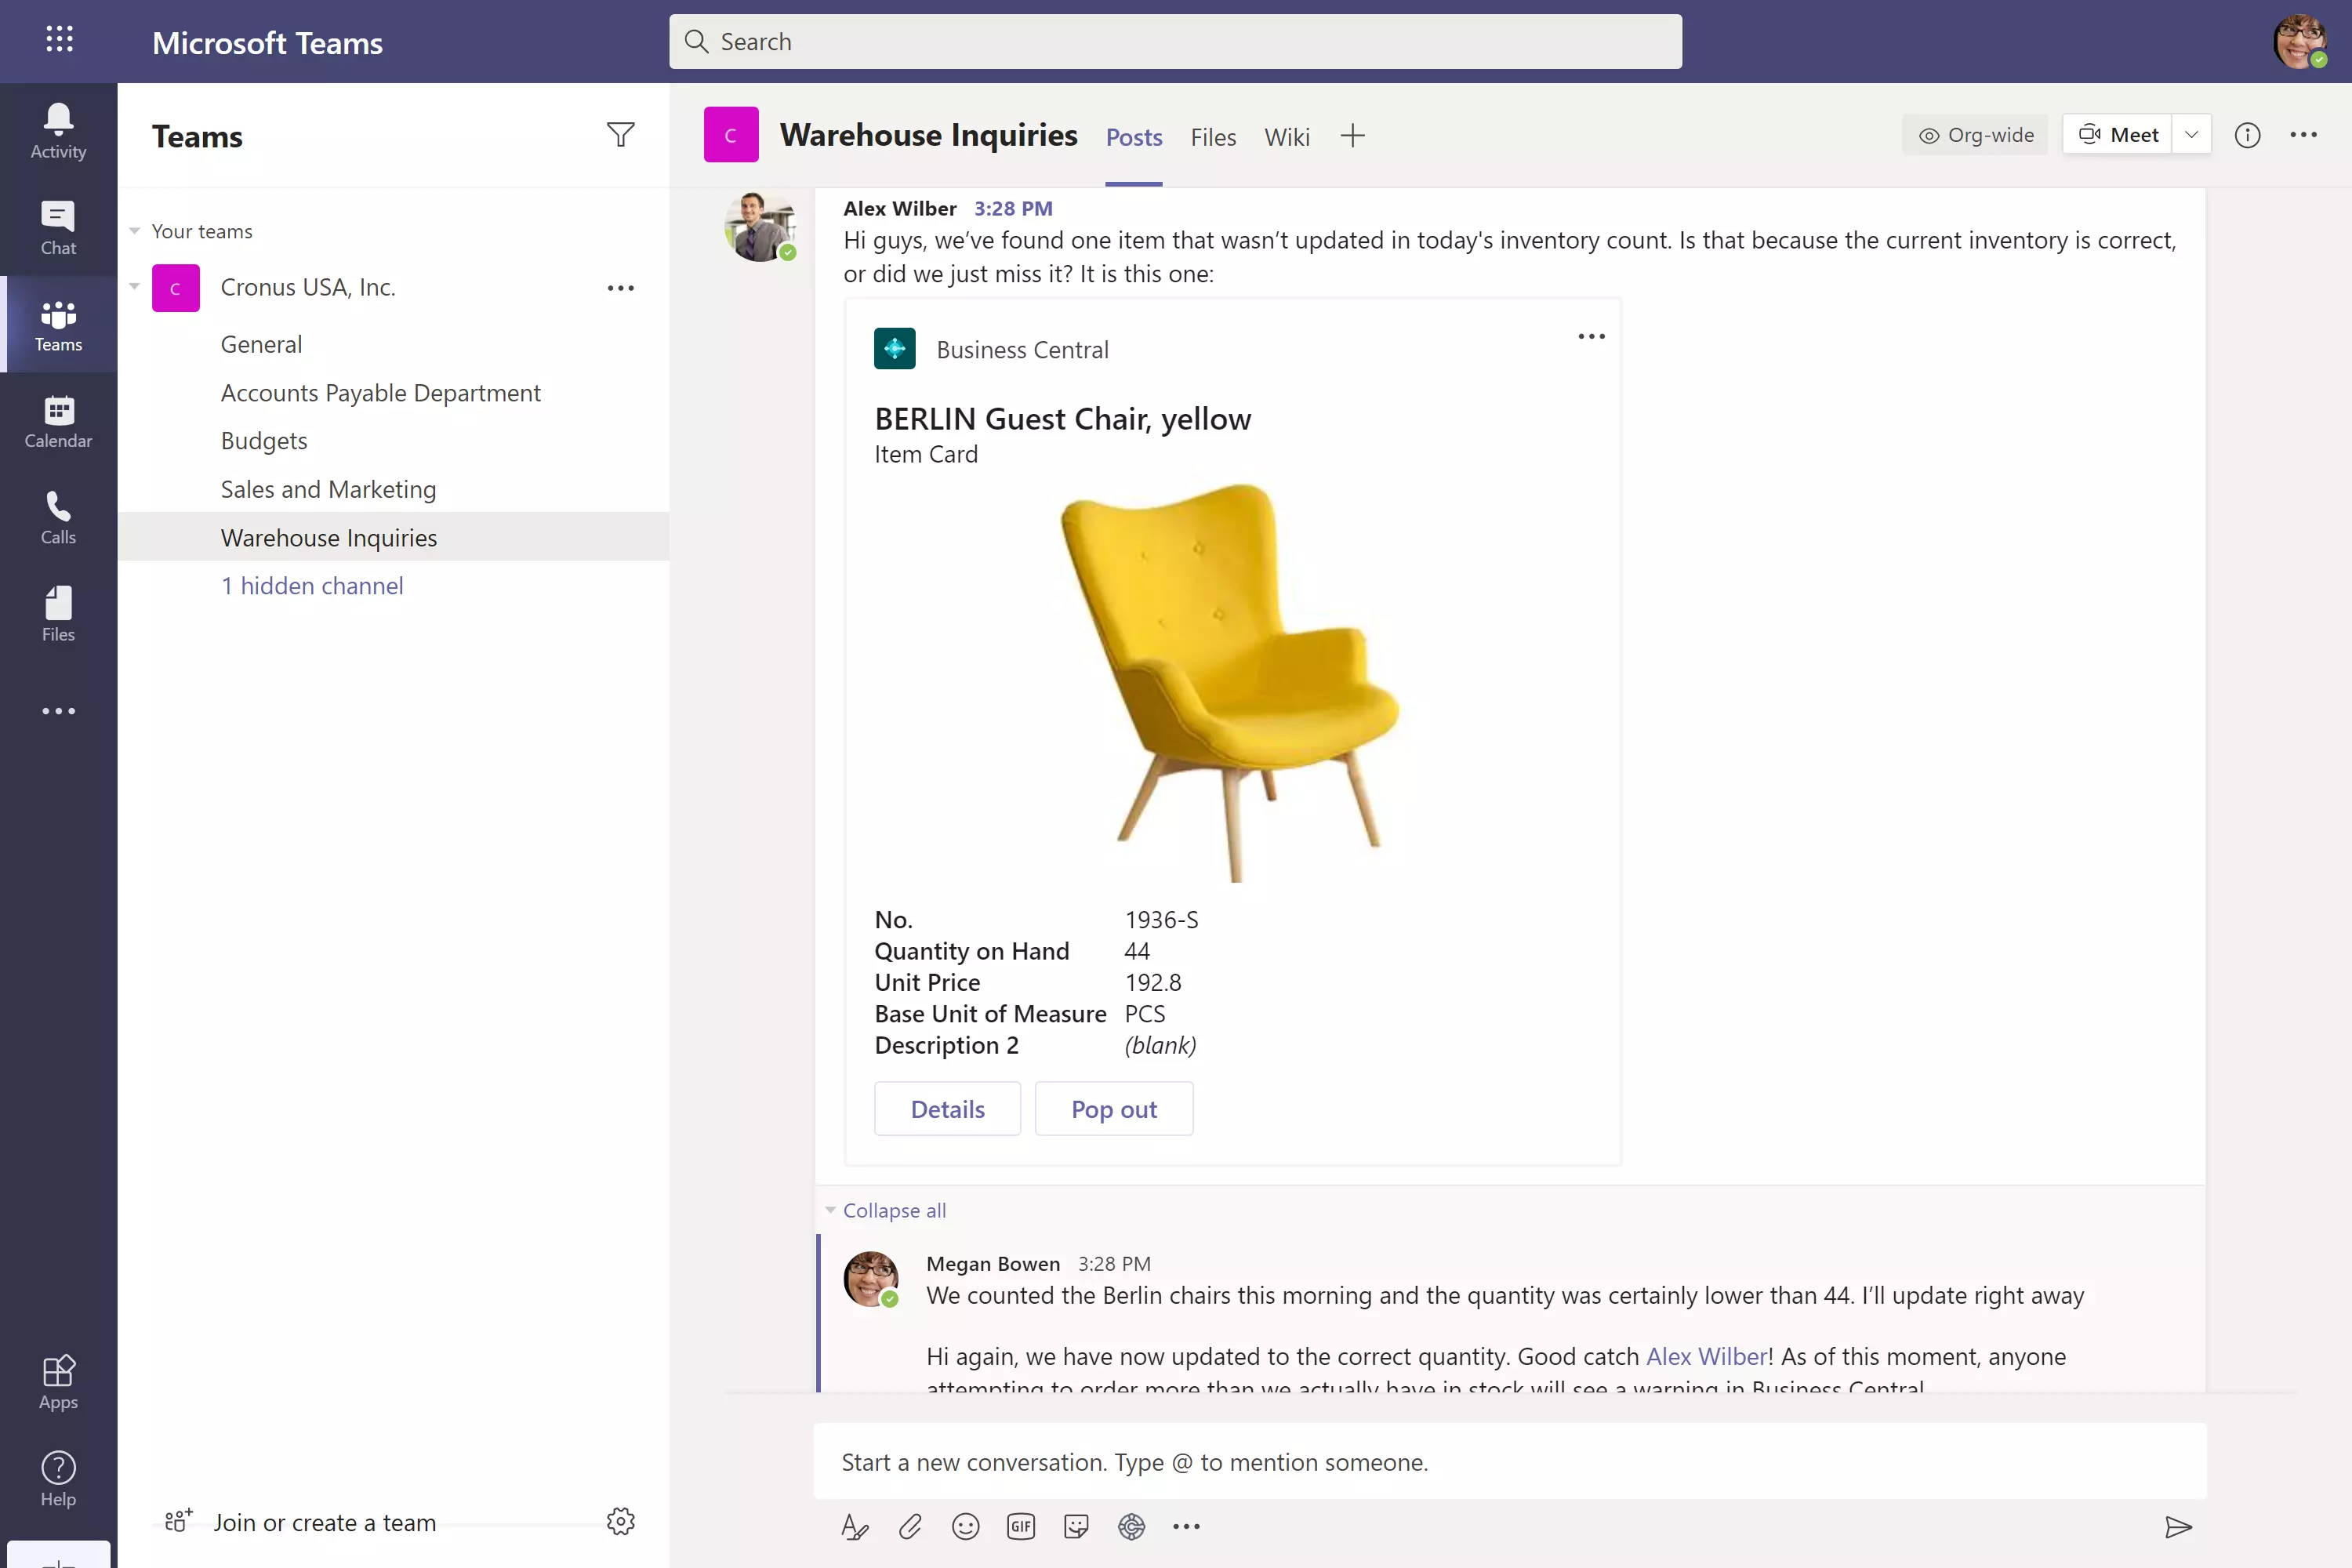 Microsoft Teams and Microsoft Dynamics 365 Business Central